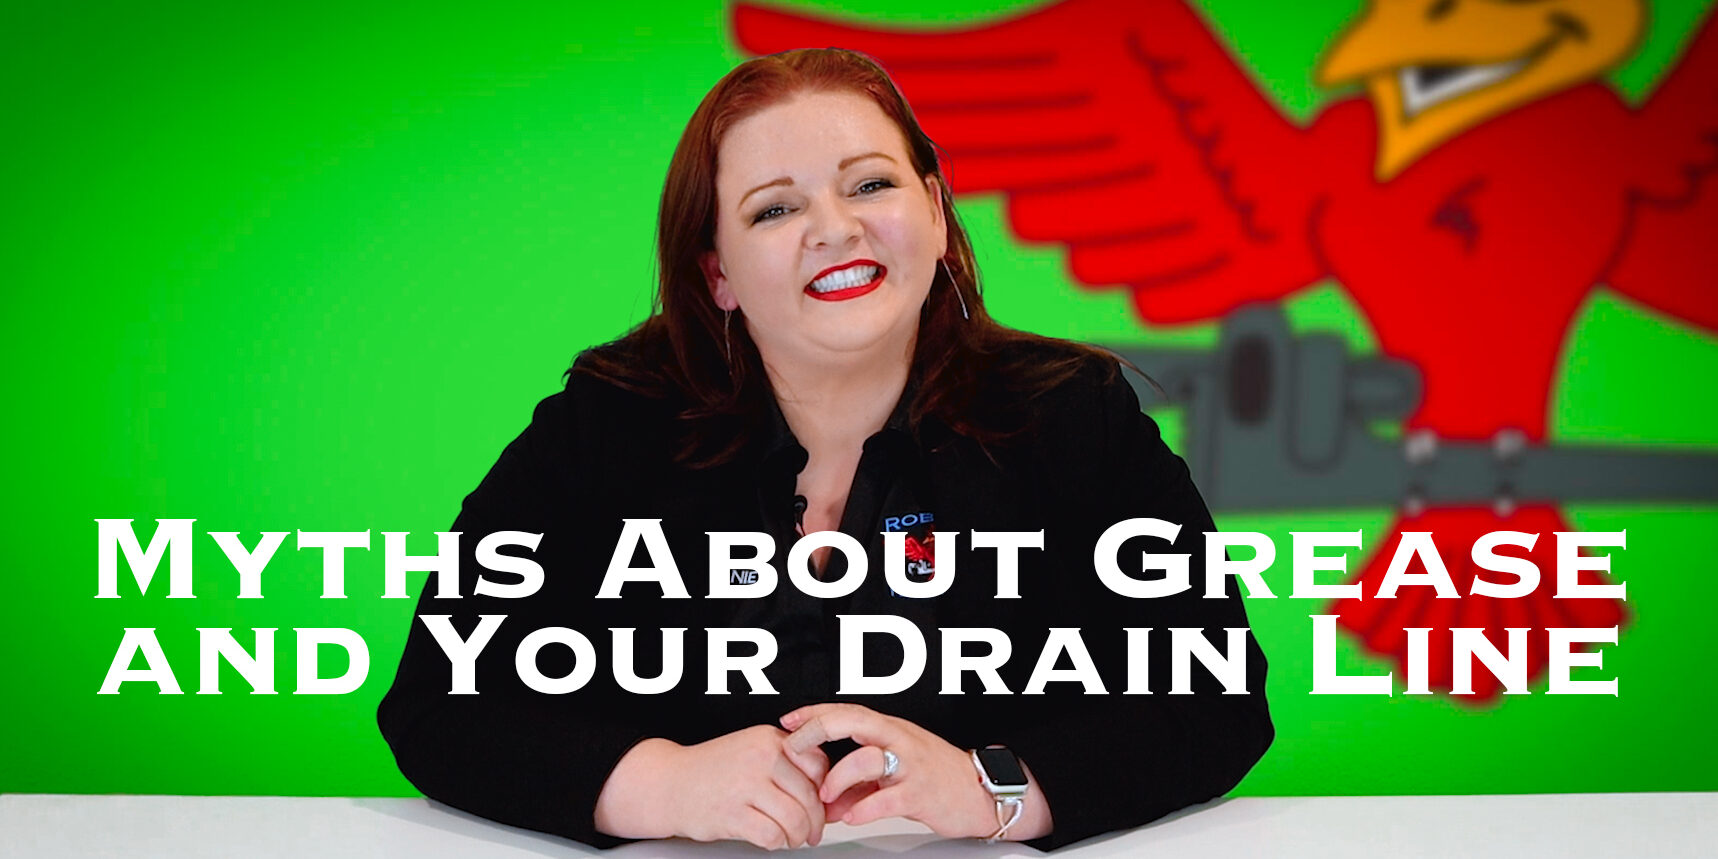 Myth-About-Grease-and-Your-Drain-Line